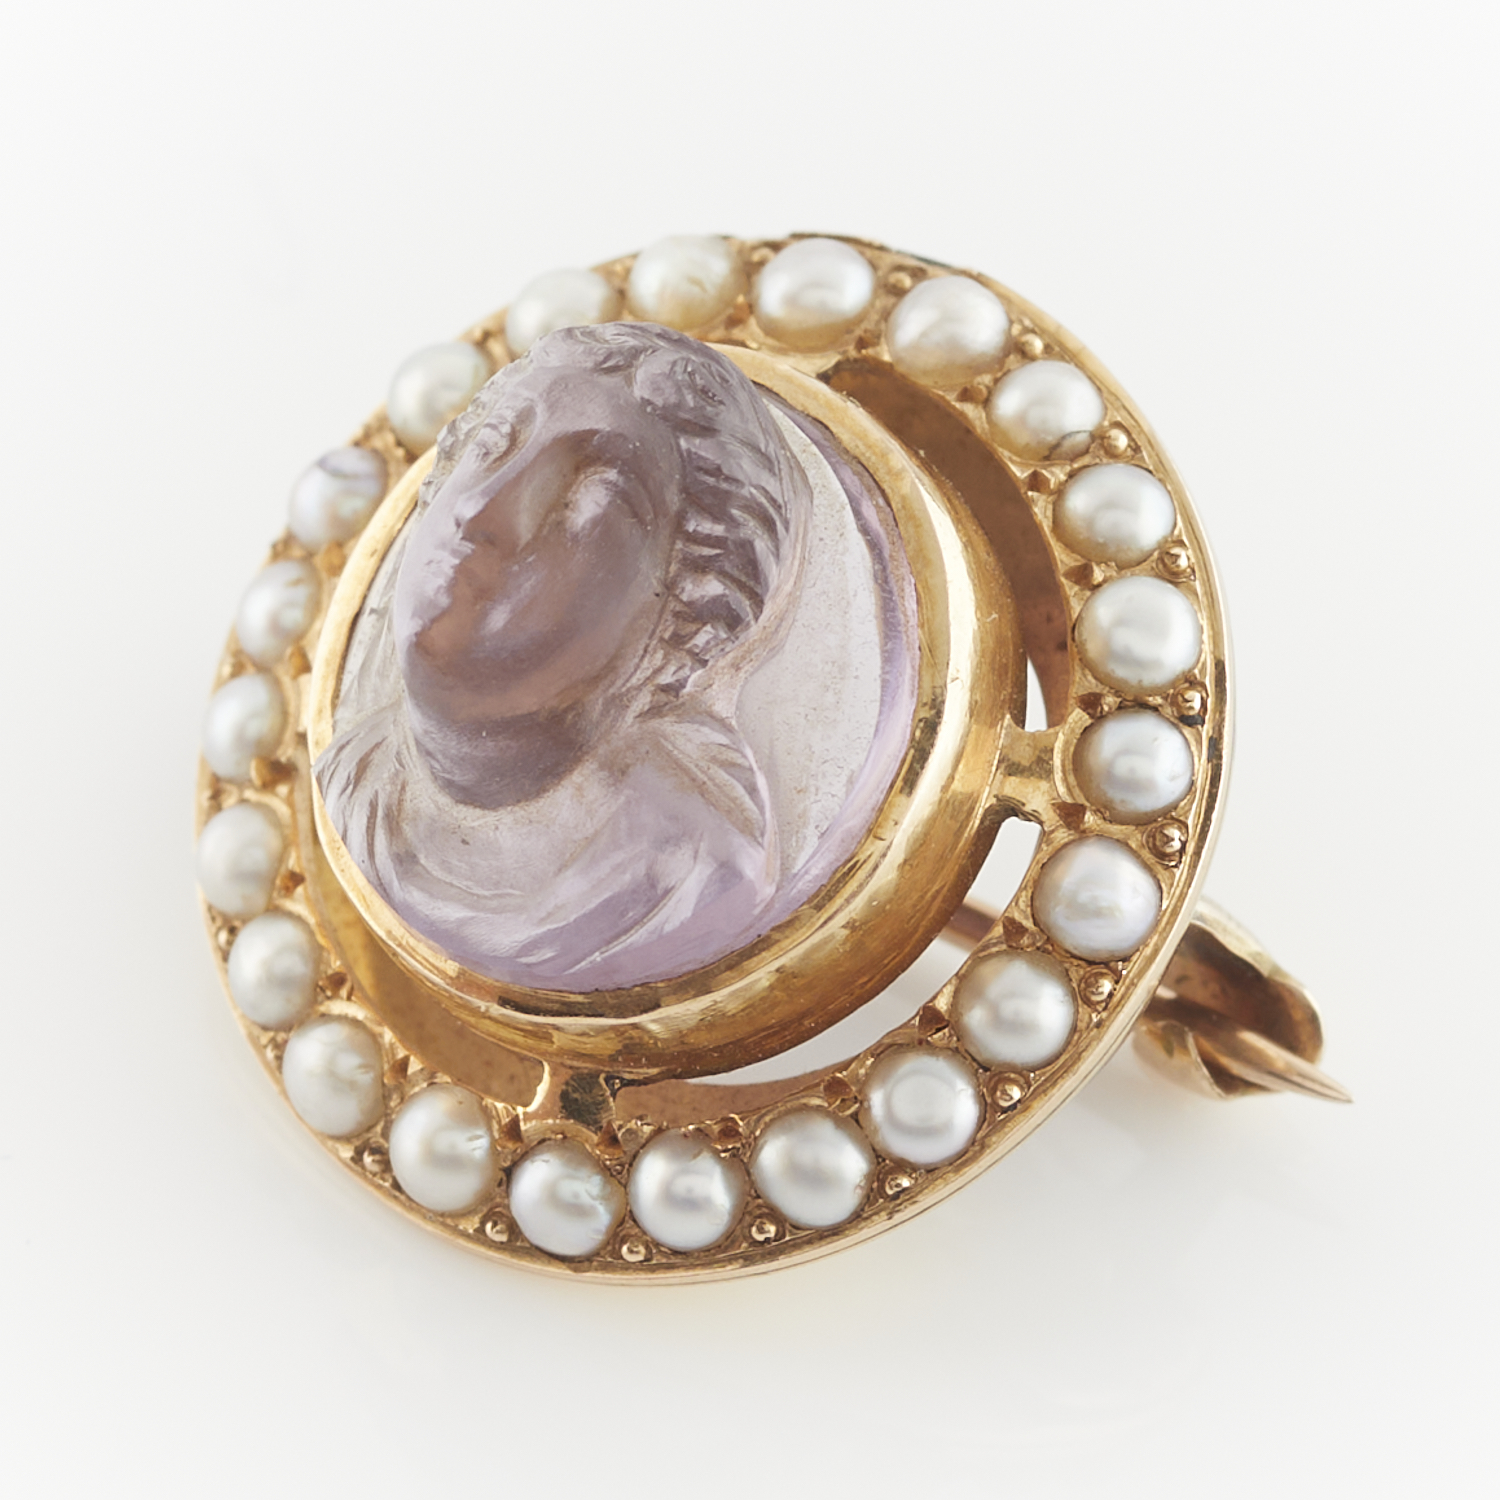 14k Yellow Gold Amethyst Cameo & Pearl Brooch - Image 3 of 7